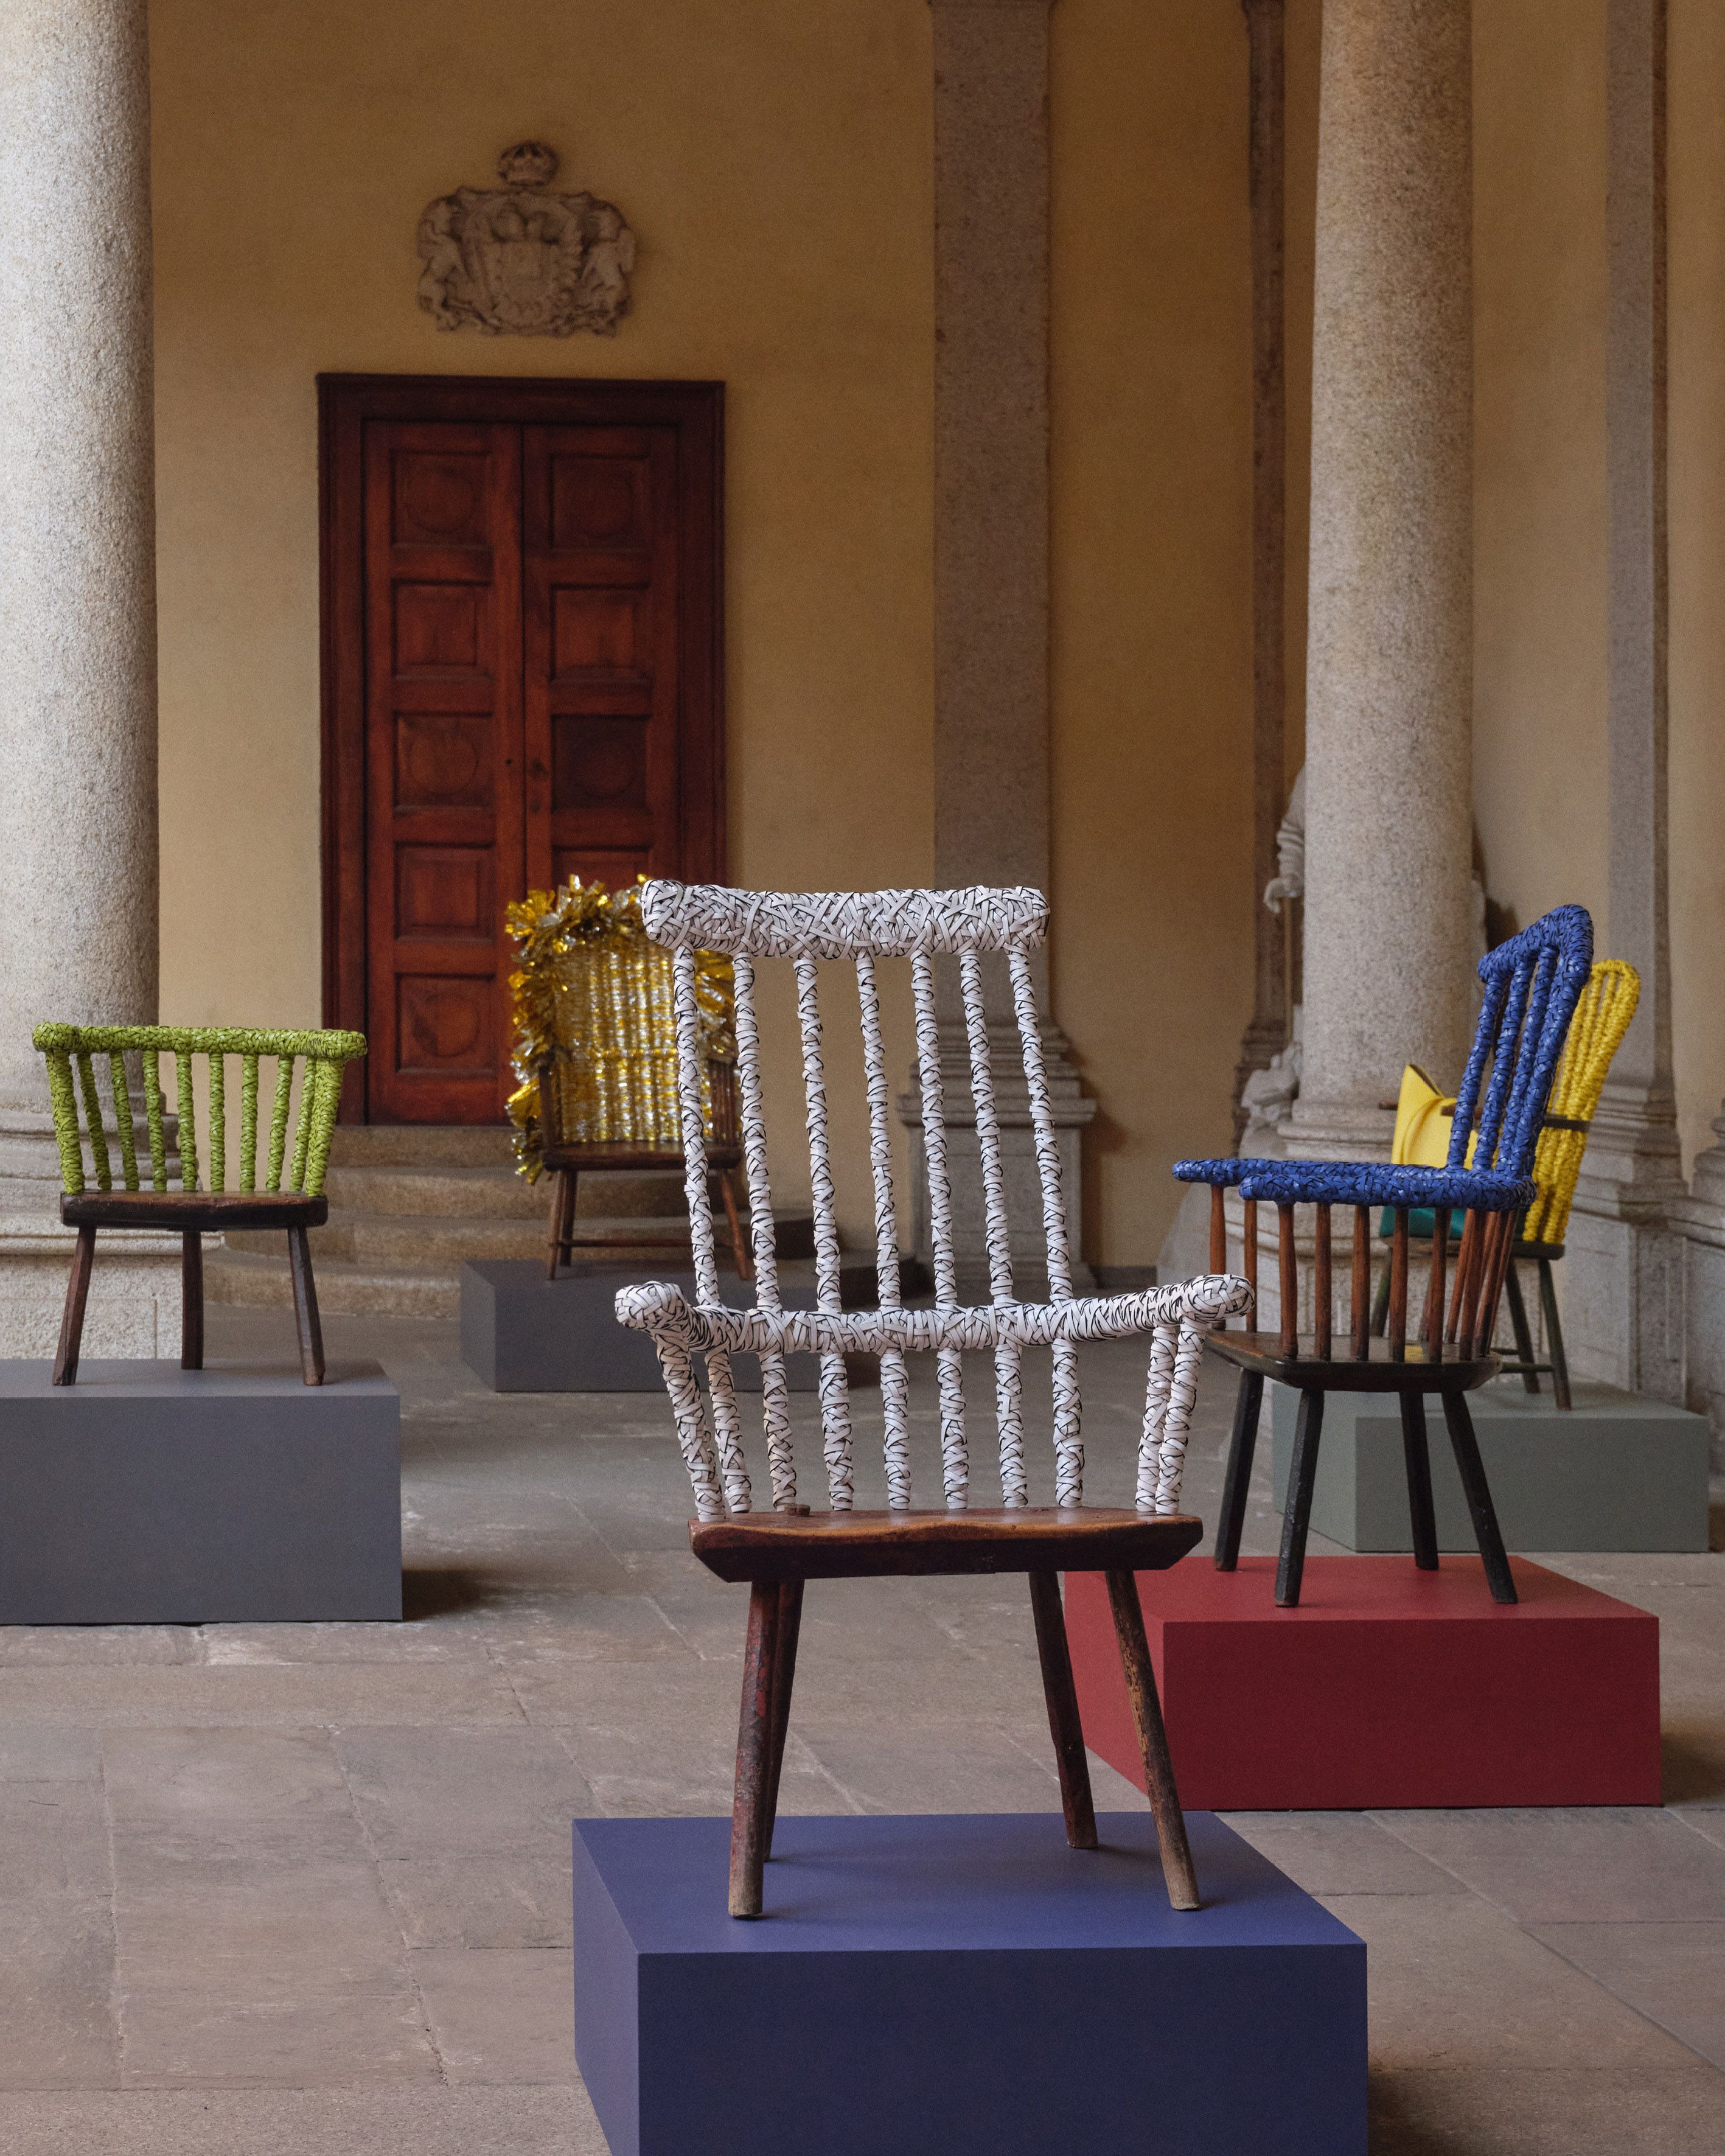 Exploring Sustainable Furniture at Salone del Mobile 2023